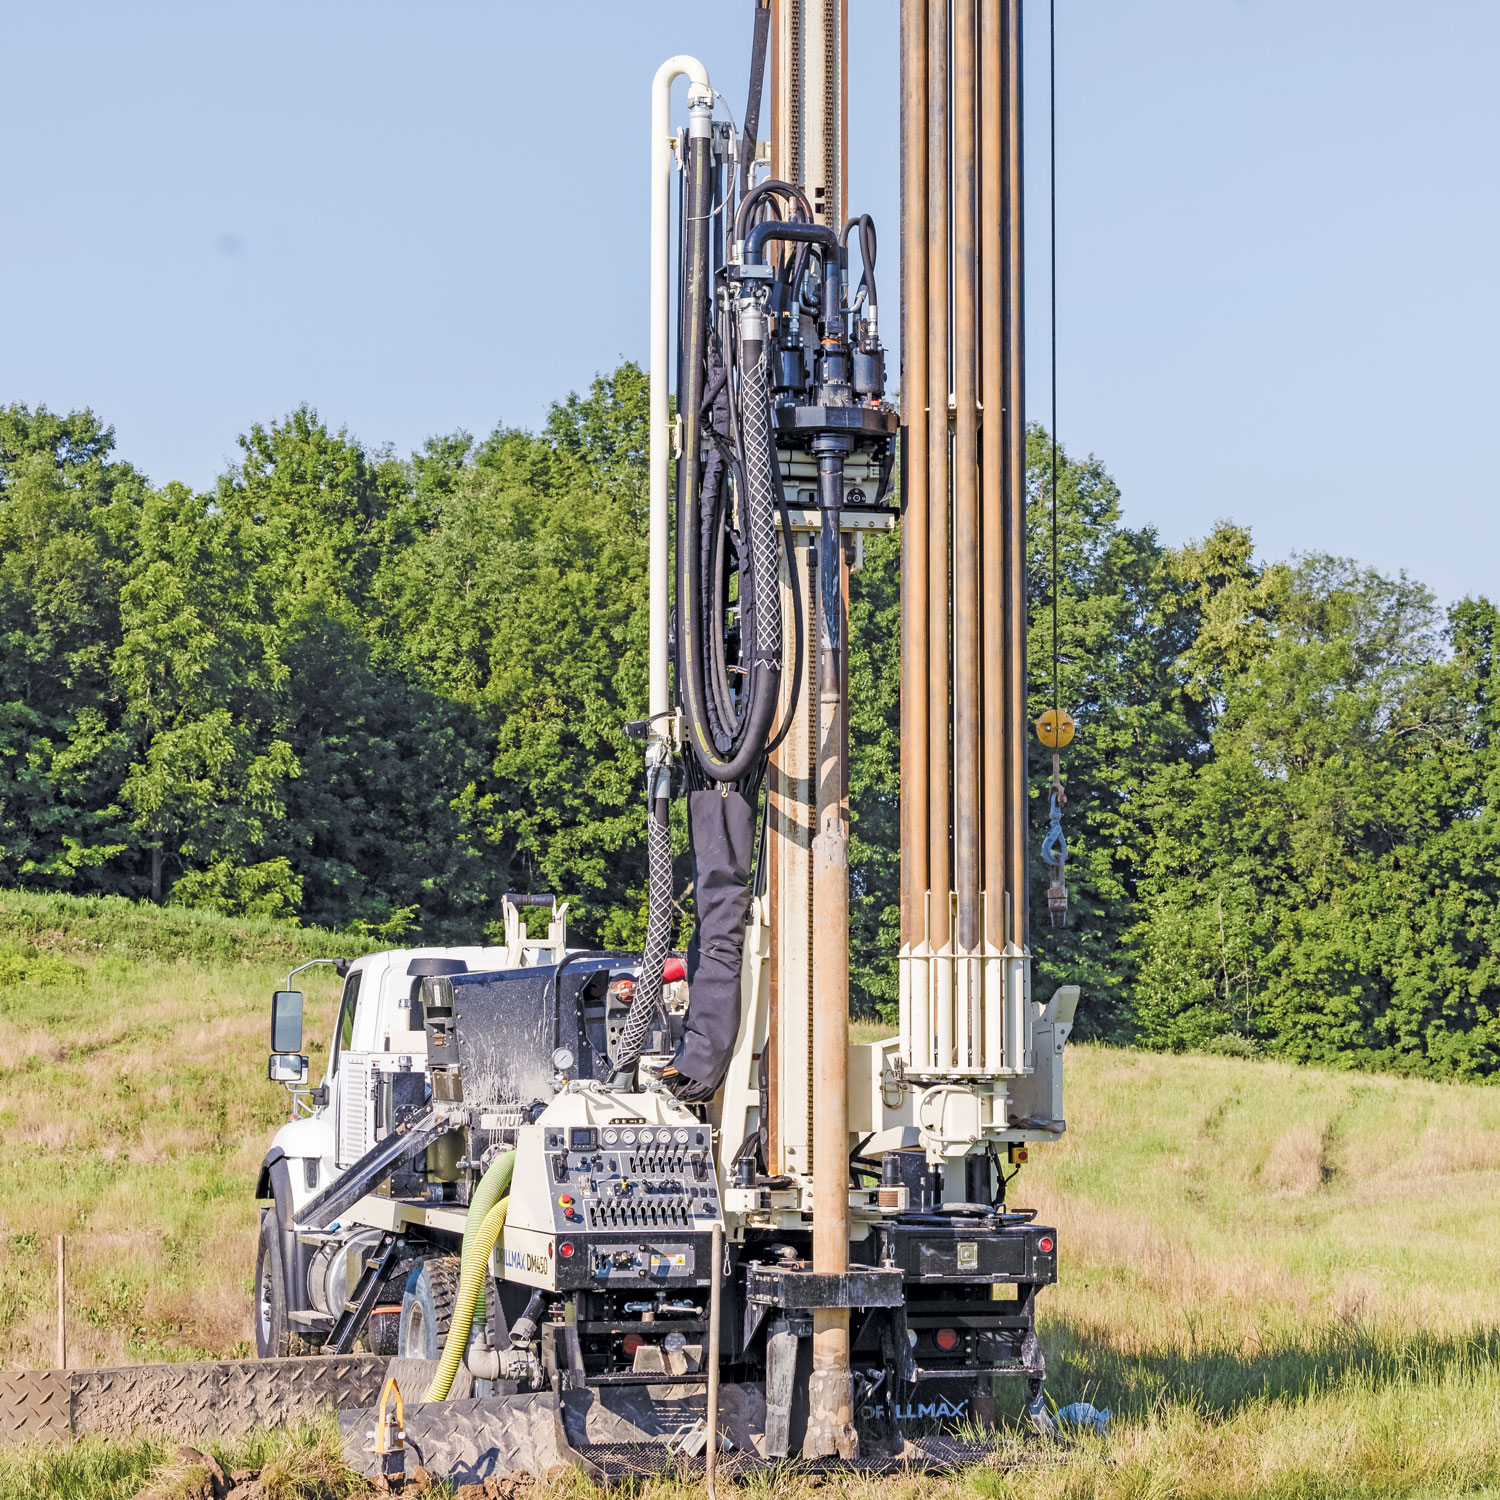 Hydraulic over electronic controls and five gauges on control panel make the DM450 easy to use and simple to diagnose troubles in the field. Sturdy drillmast with roller system reduces strain on rig so DM450 performs same water well drilling to 600 feet as it does to 20 feet.